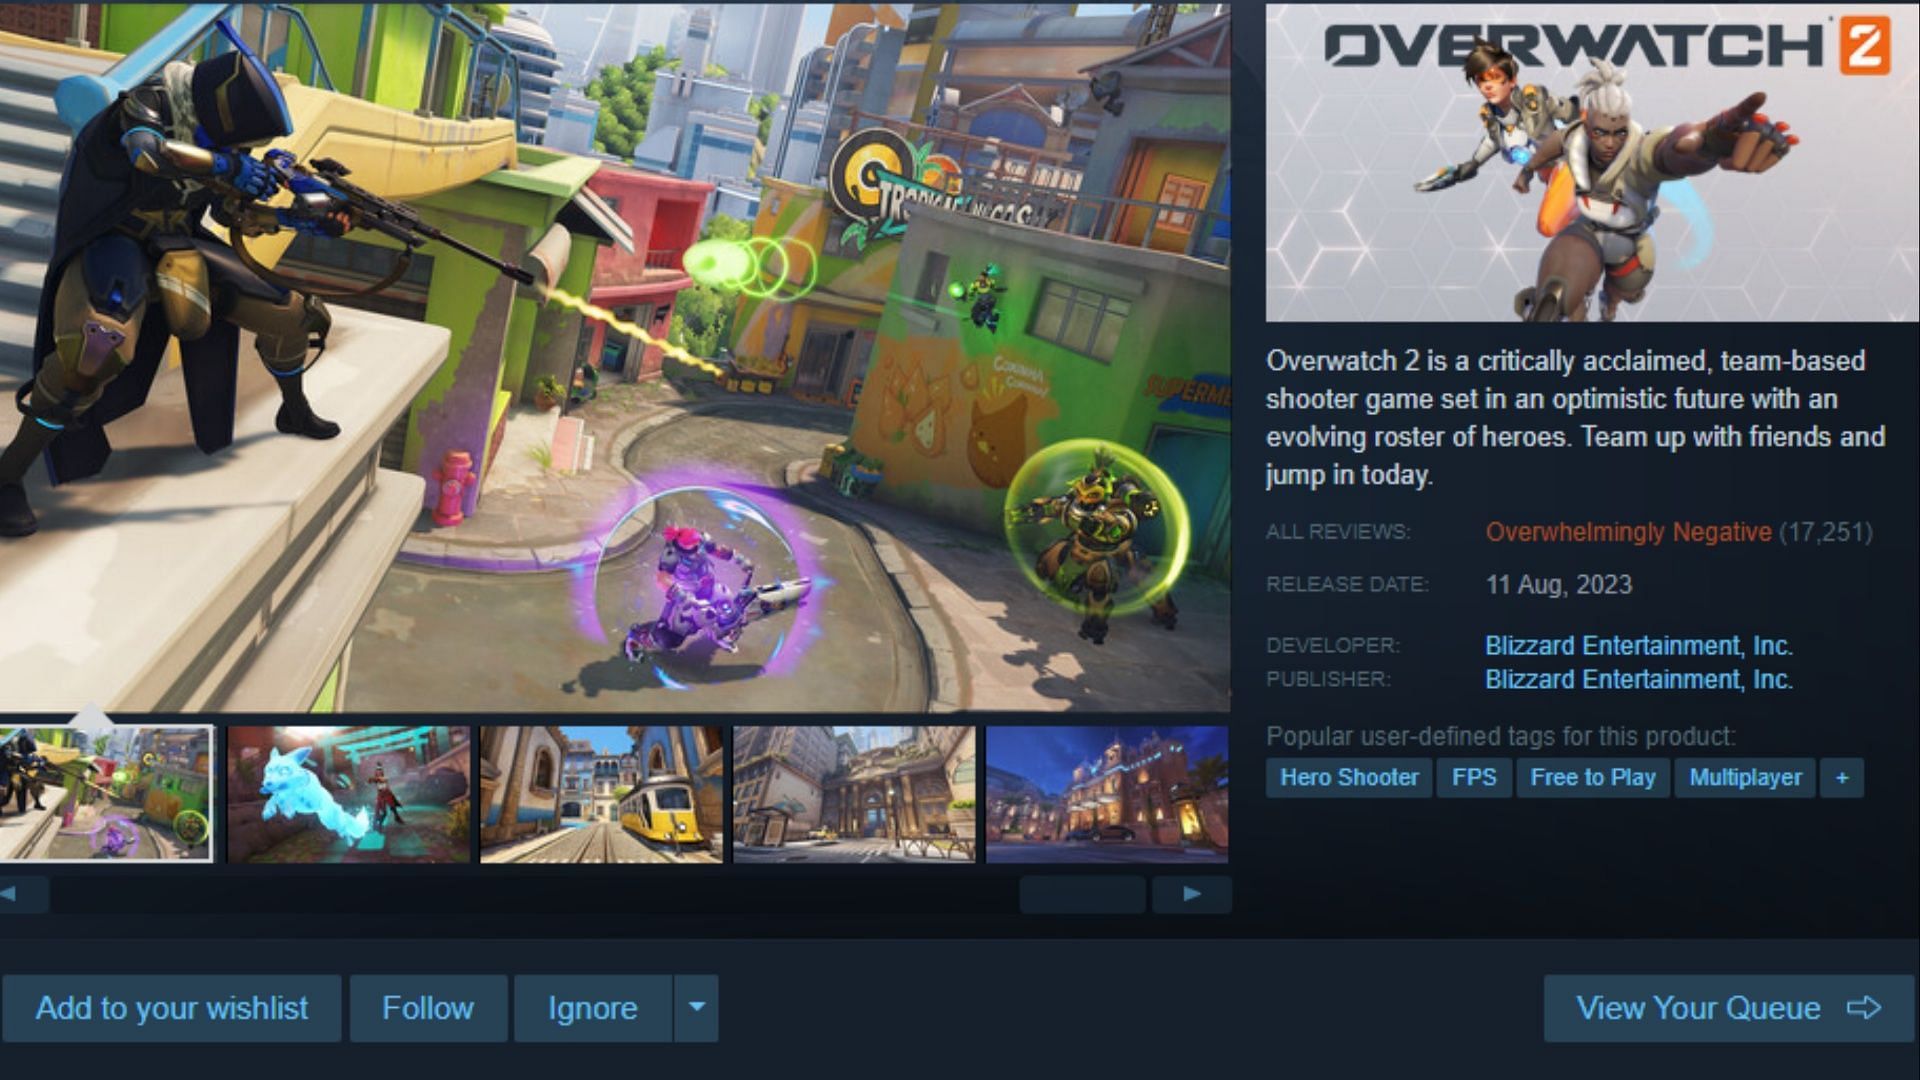 Overwatch 2 is currently top 10 in terms of steam revenue (Global). This is  actually impressive considering the online average is 30k players. The game  ahead such projects as Apex or TF2 (